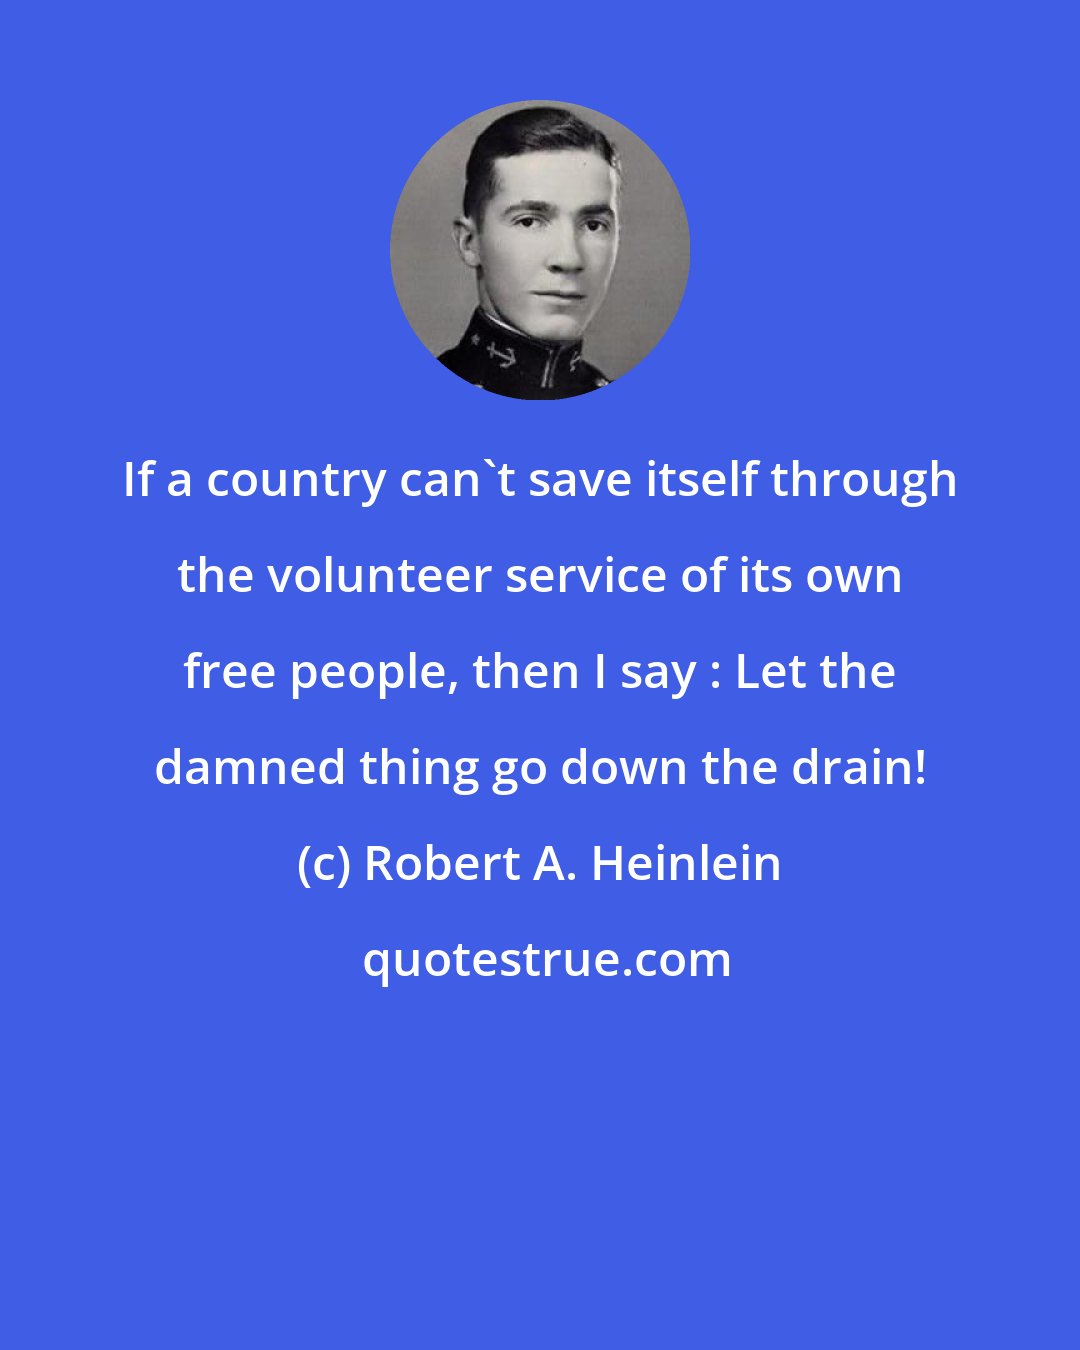 Robert A. Heinlein: If a country can't save itself through the volunteer service of its own free people, then I say : Let the damned thing go down the drain!